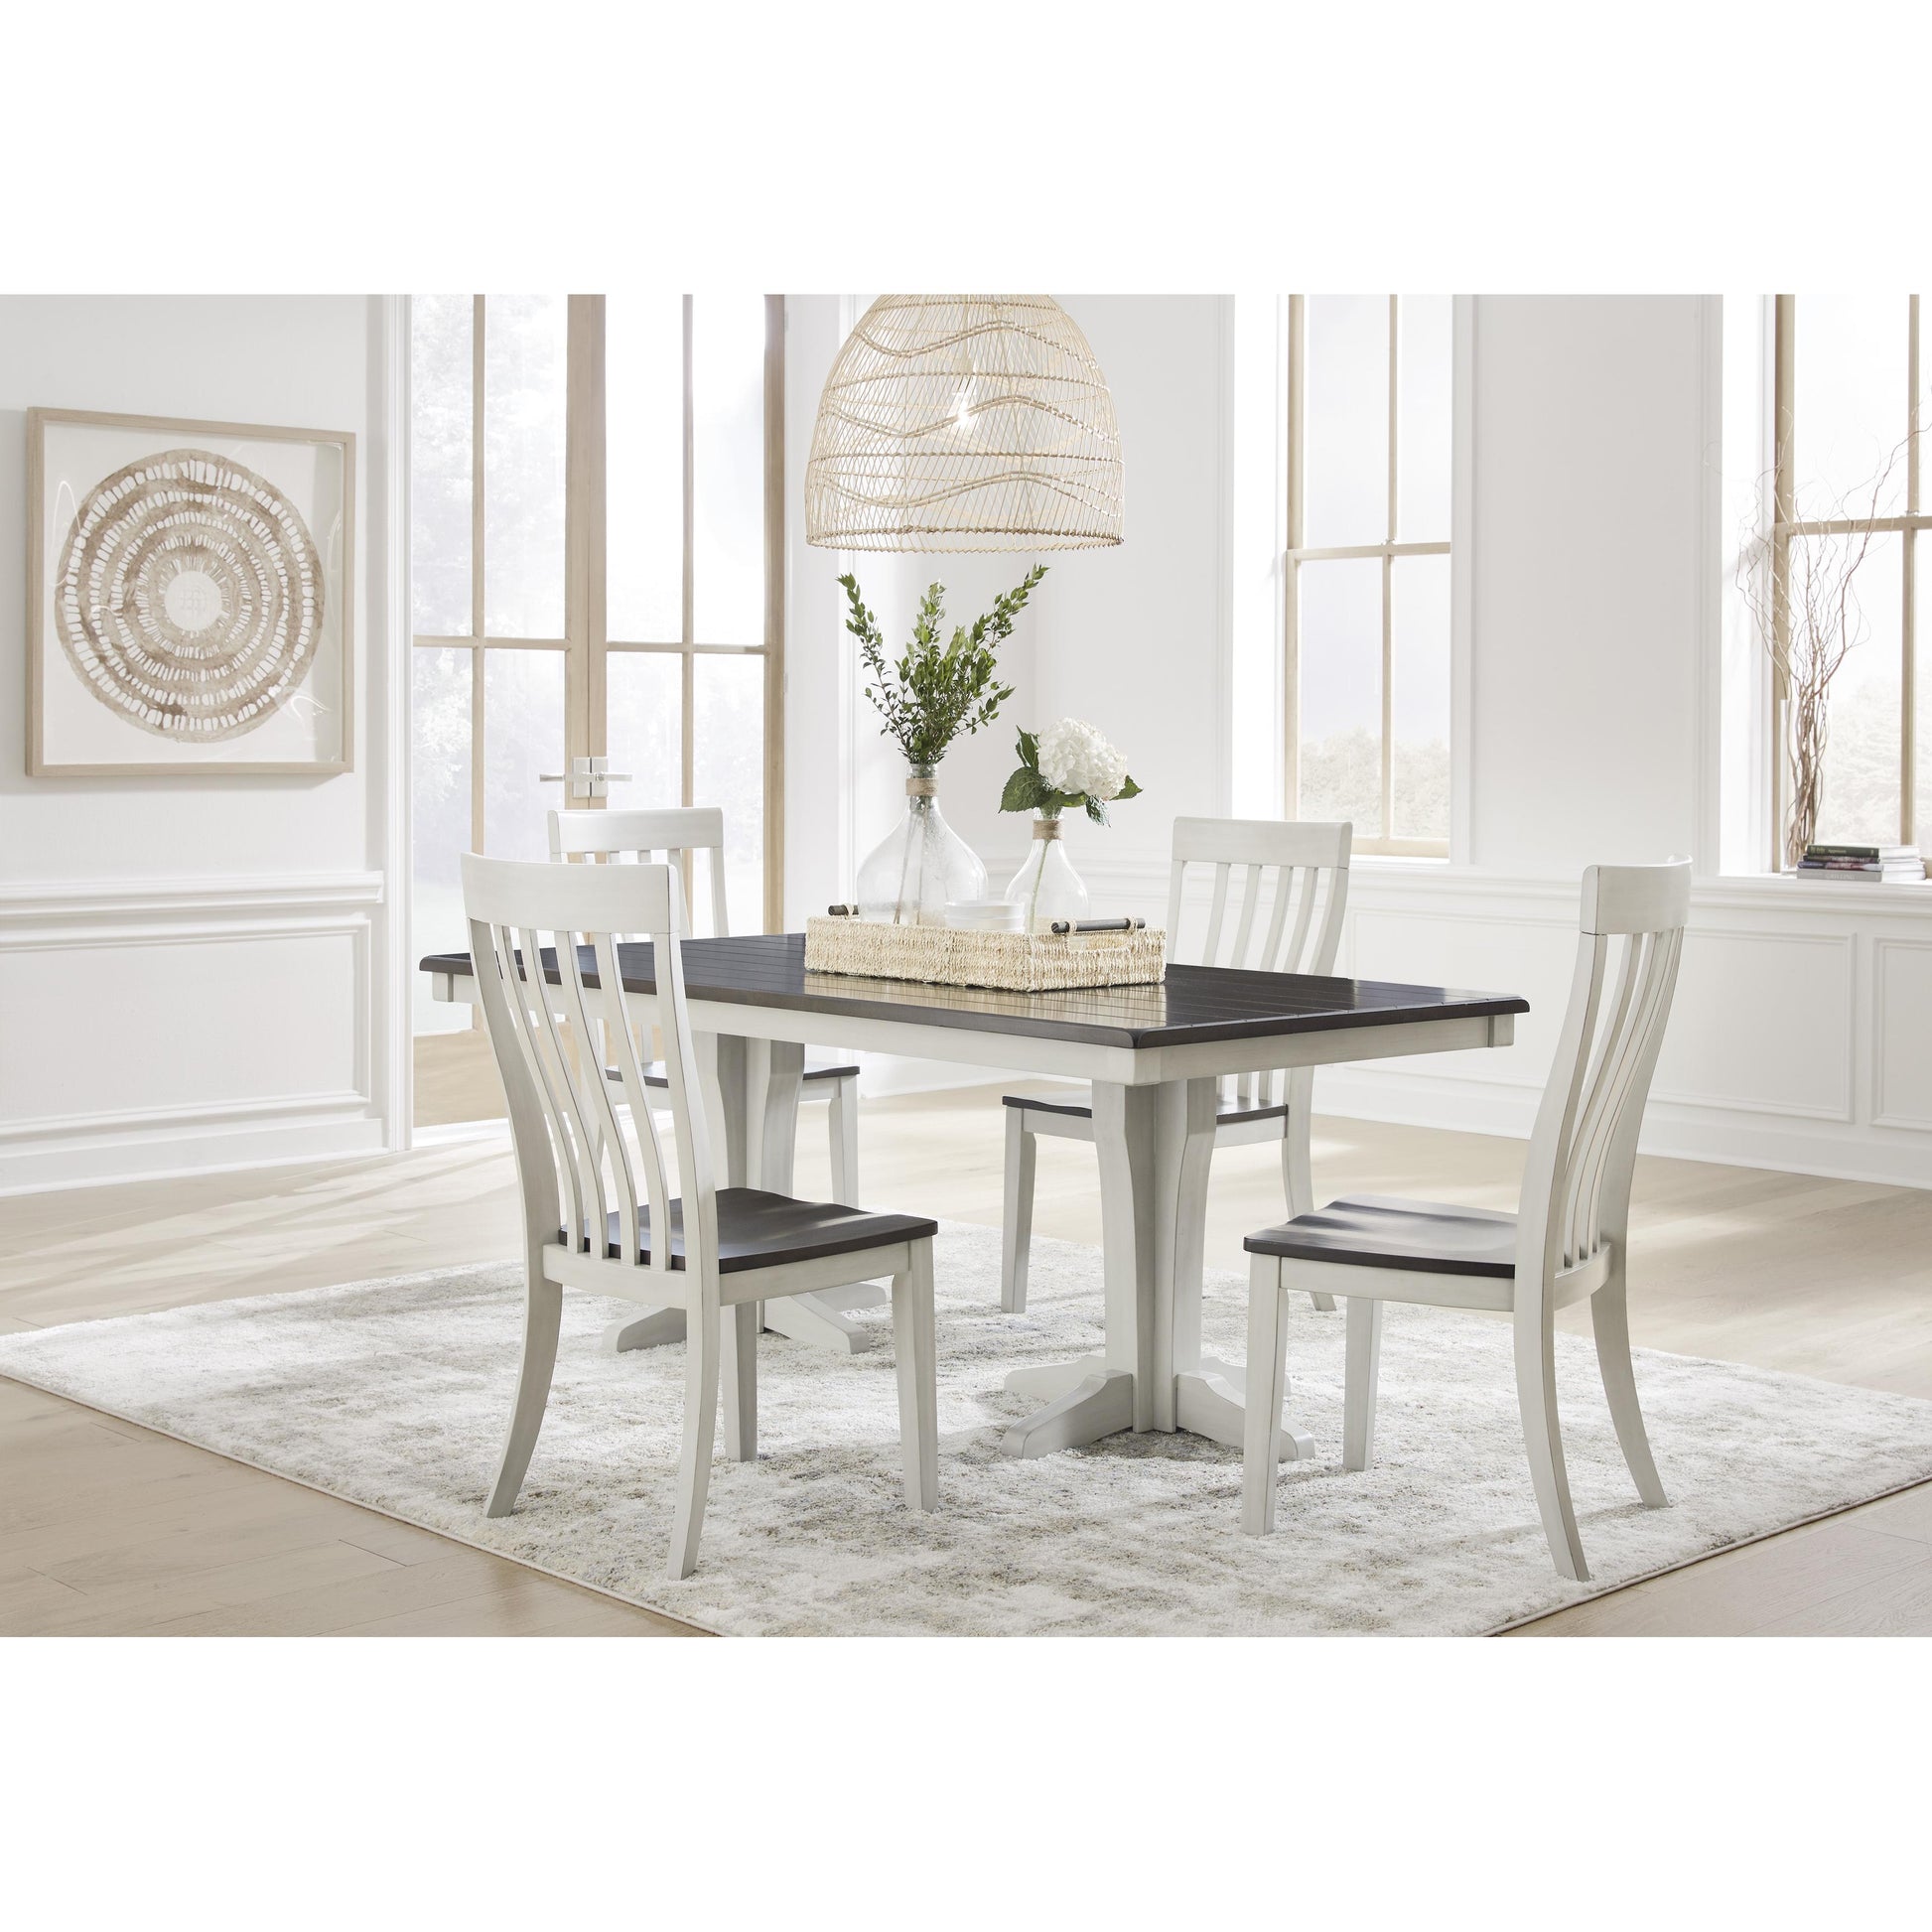 Signature Design by Ashley Darborn Dining Table D796-25B/D796-25T IMAGE 11